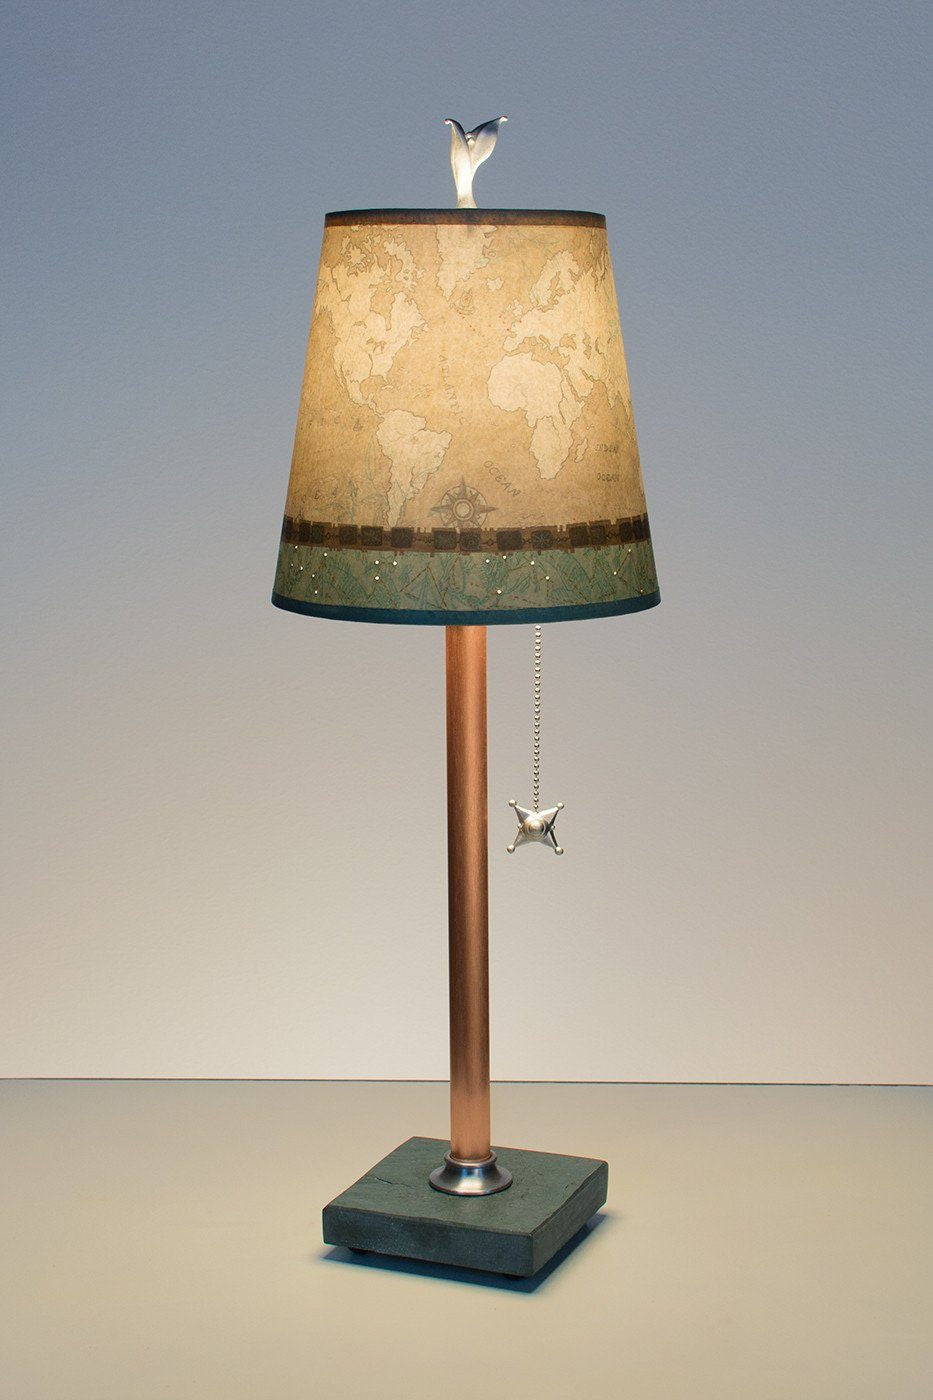 Copper Table Lamp on Vermont Slate Base with Small Drum Shade in Sand Map Lit